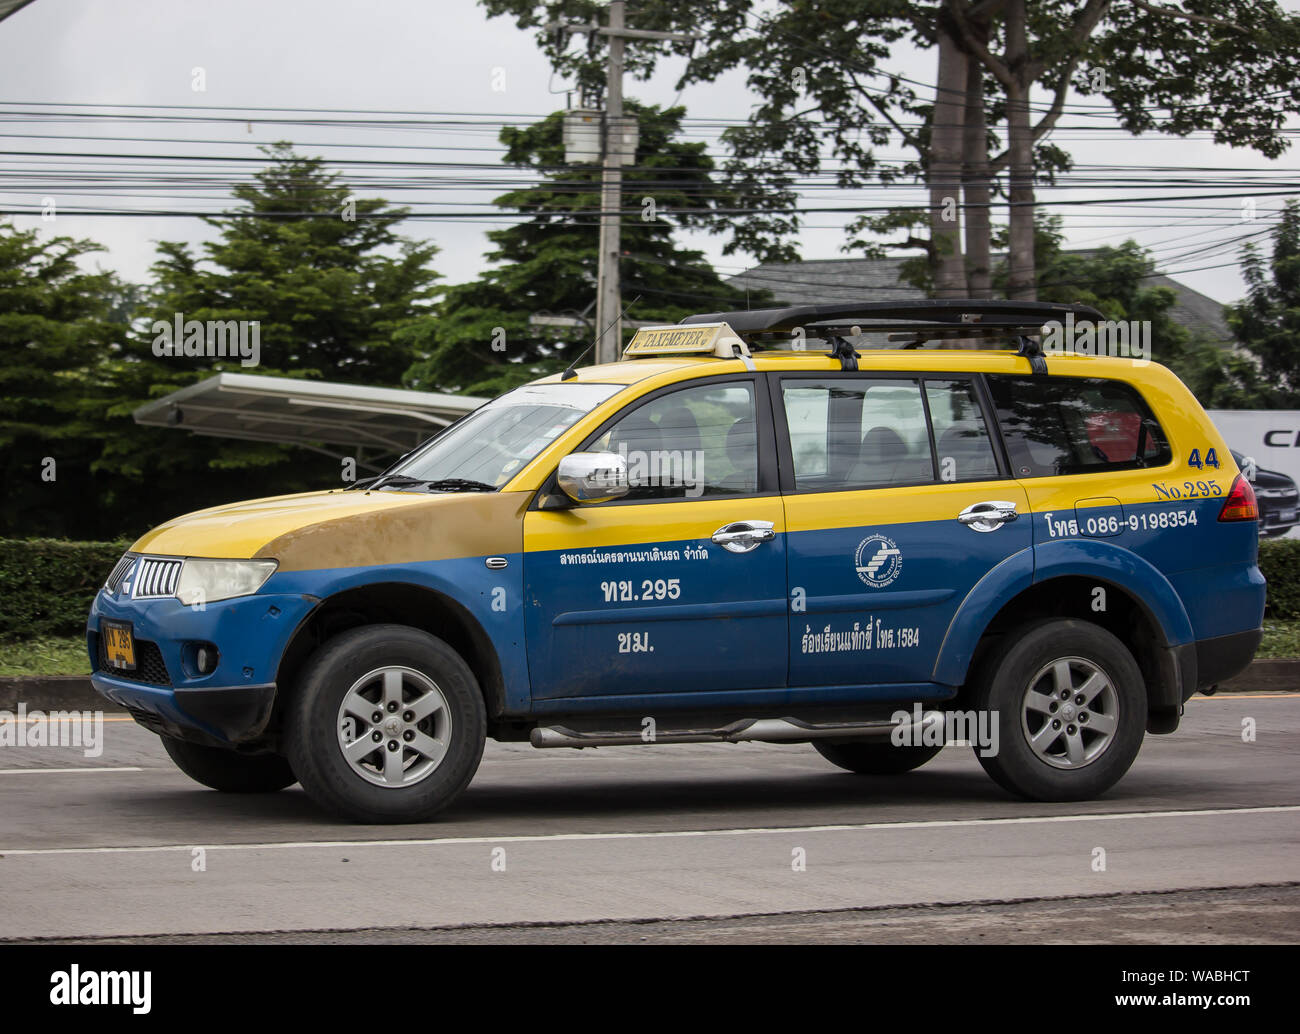 Chiangmai, Thailand - August 16 2019: City taxi Meter chiangmai,Mitsubishi Pajero, Service in city. Photo at road no.1001 about 8 km from downtown Chi Stock Photo